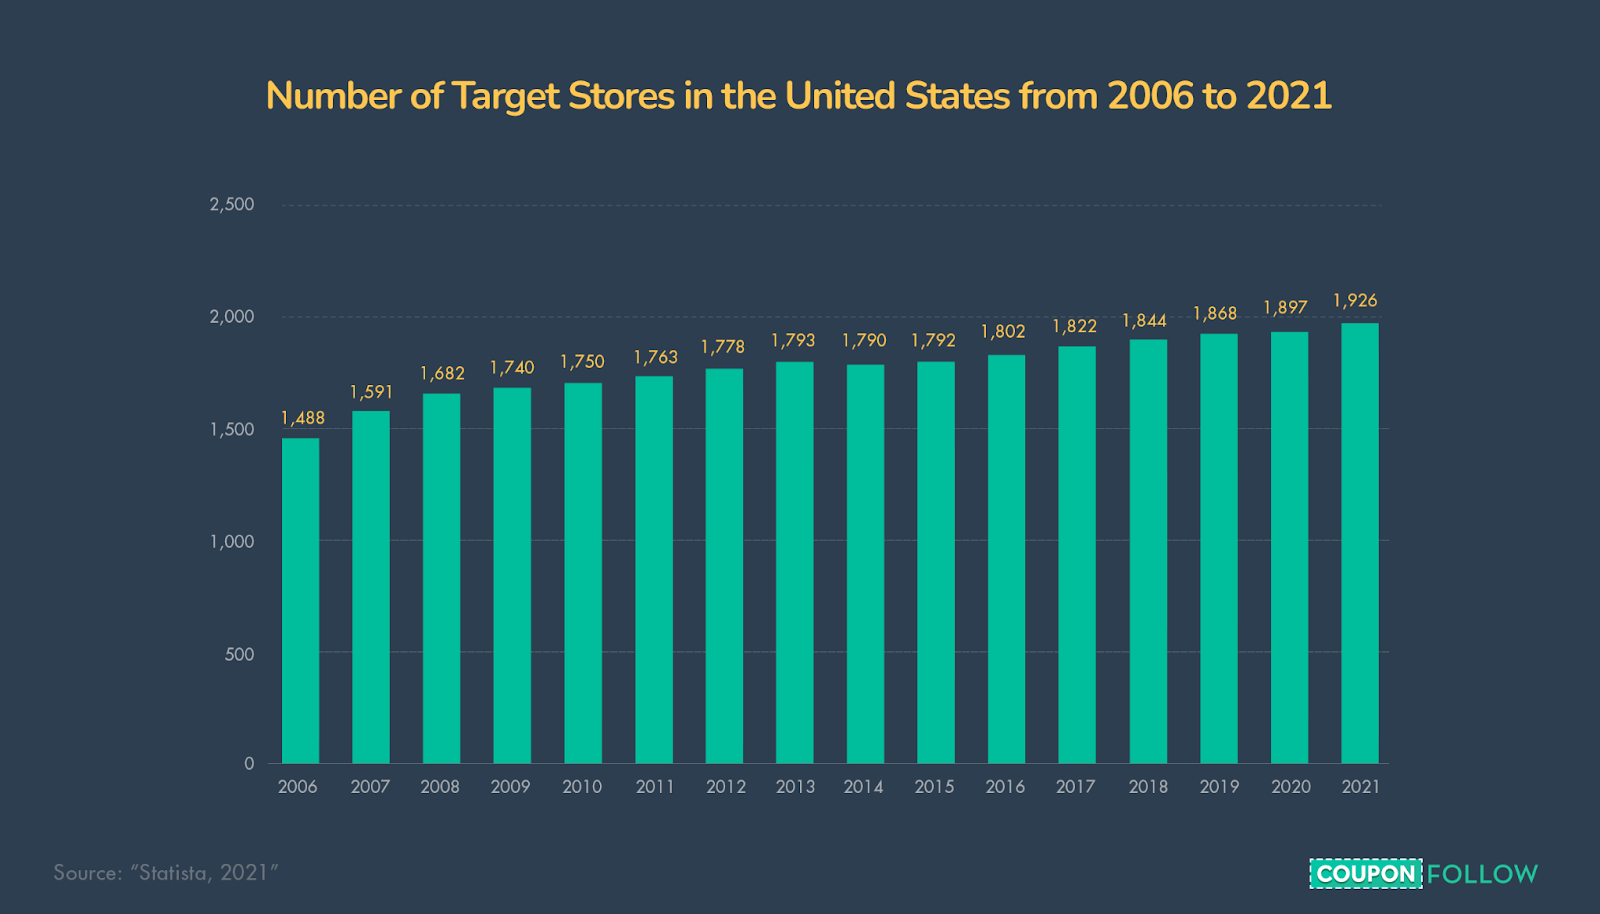 graph depicting the number of target stores in the US from 2006 to 2021